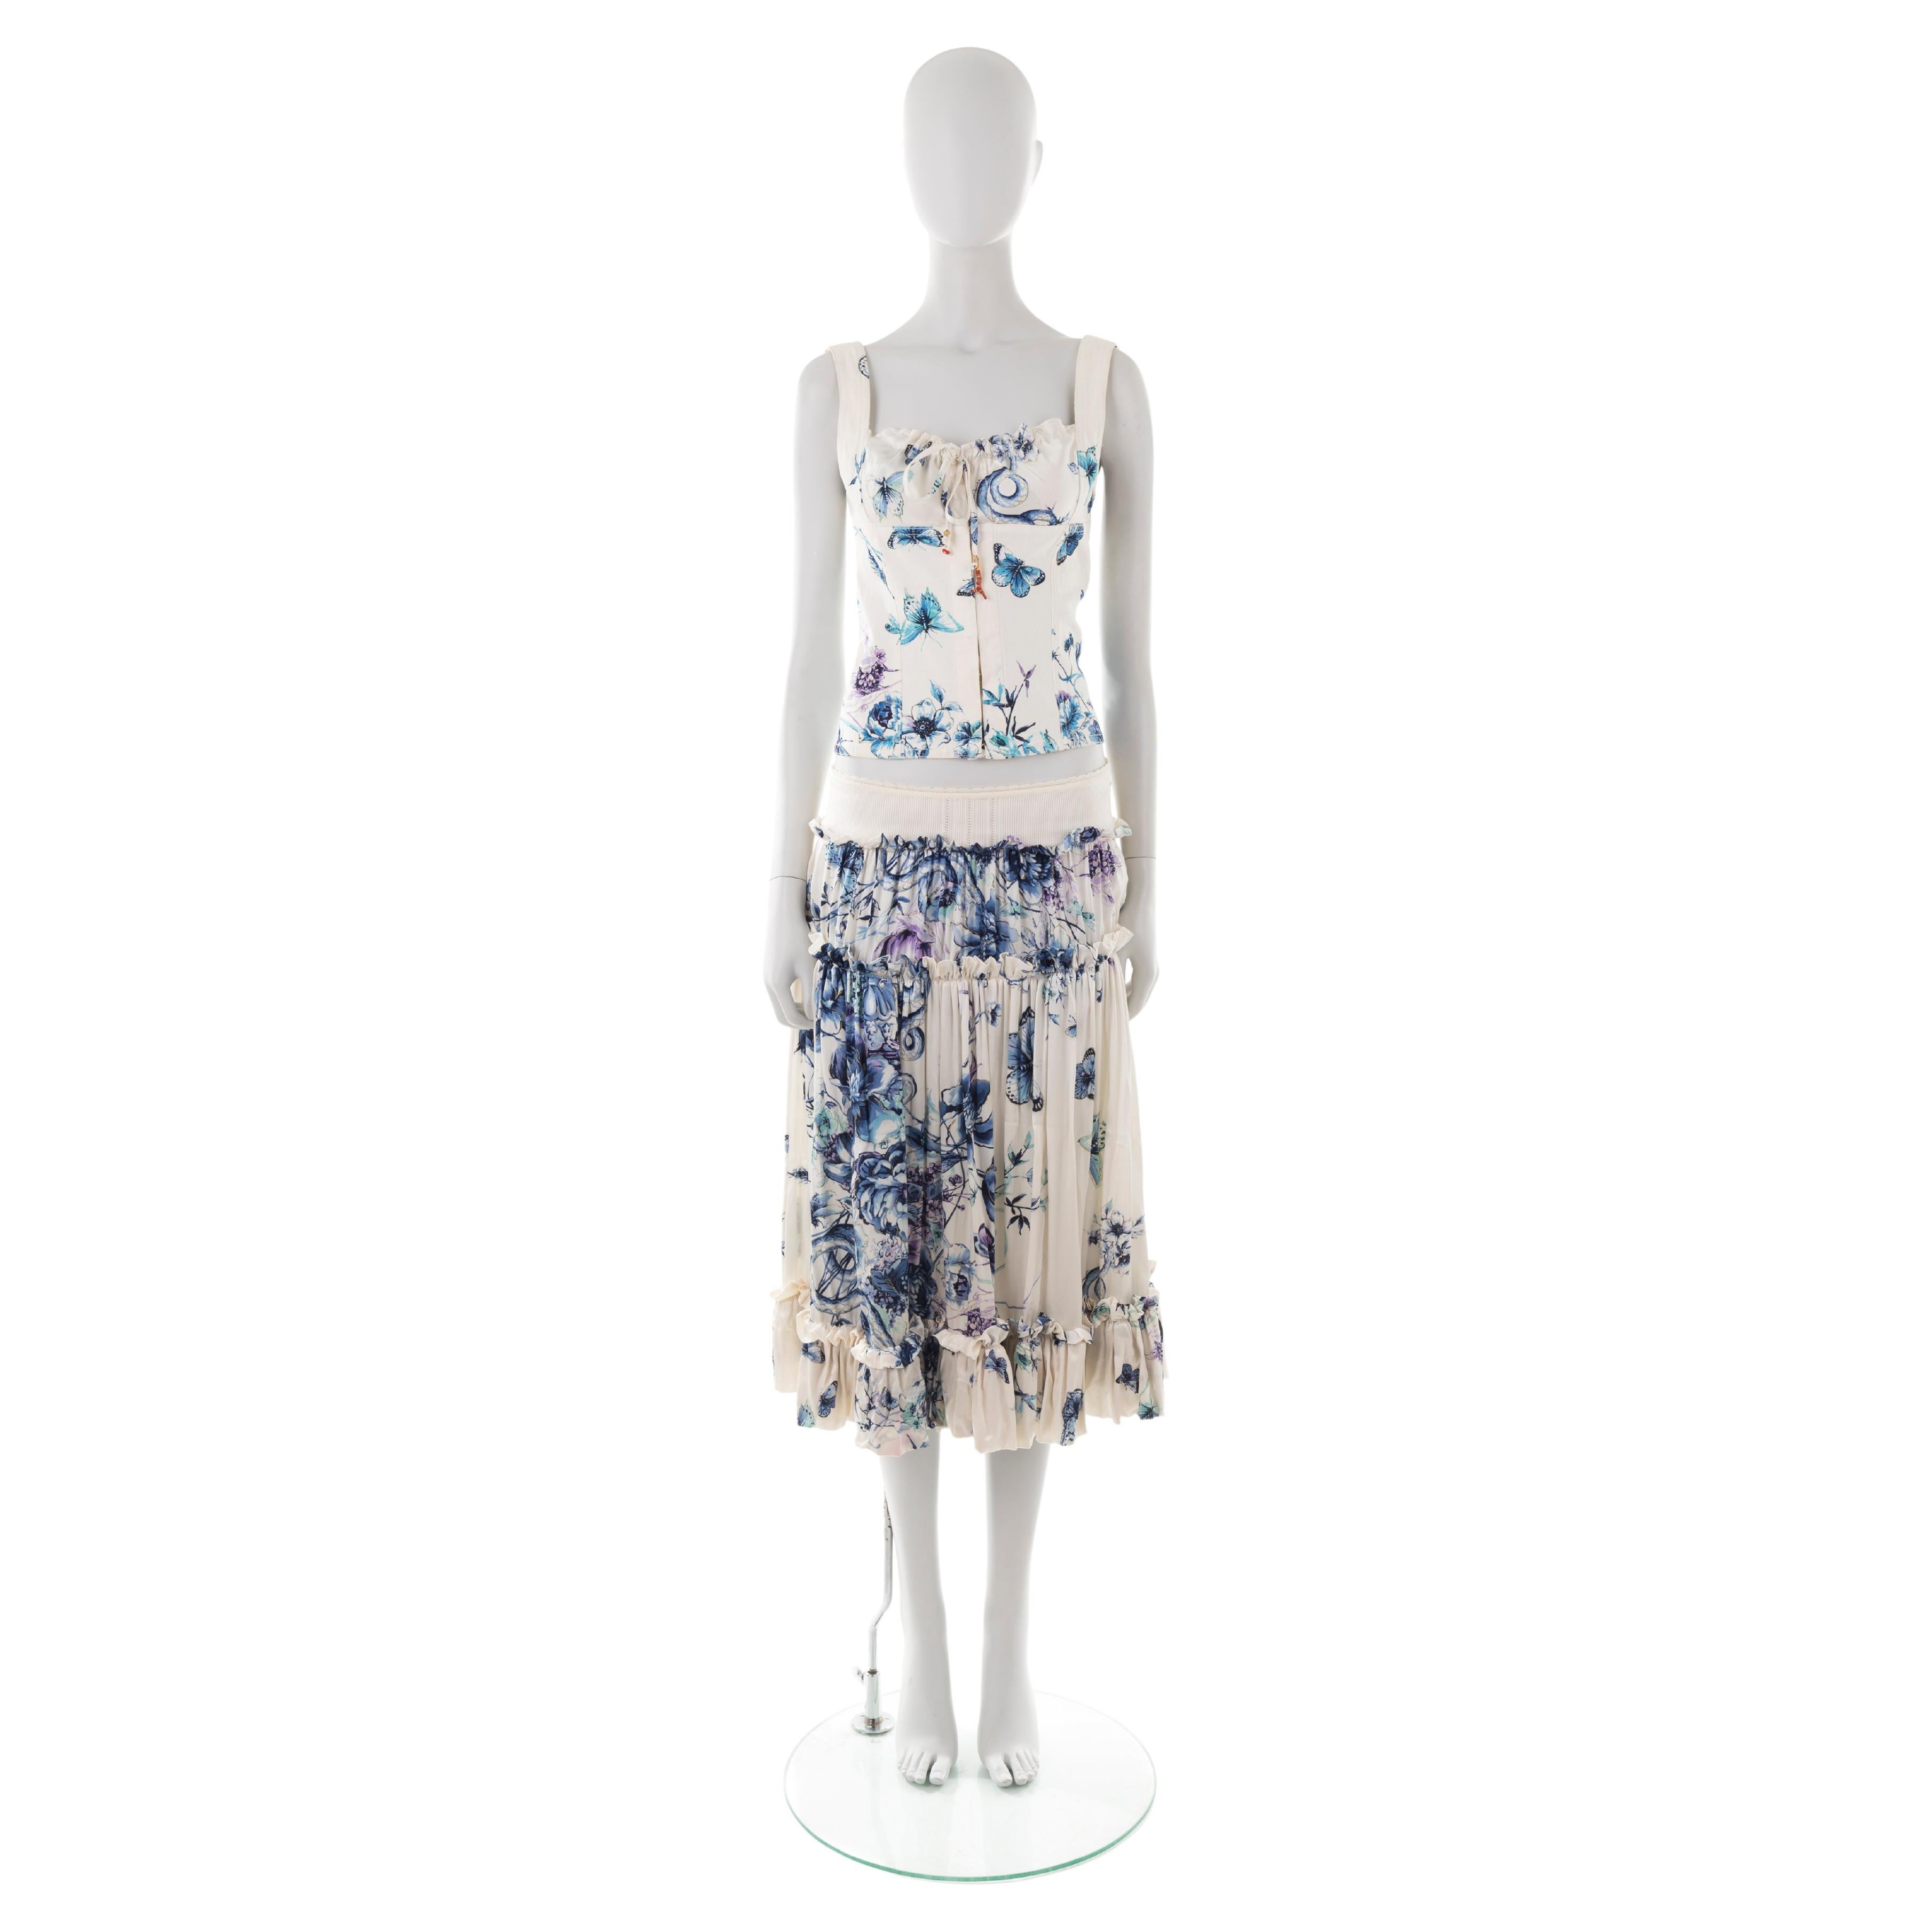 - White siilk set (top + skirt)
- Purple/white butterfly floral print
- Cotton denim corset-inspired structured top
- Silk collar with drawstring (coral charm attached)
- Low waist multi-panel silk boho skirt